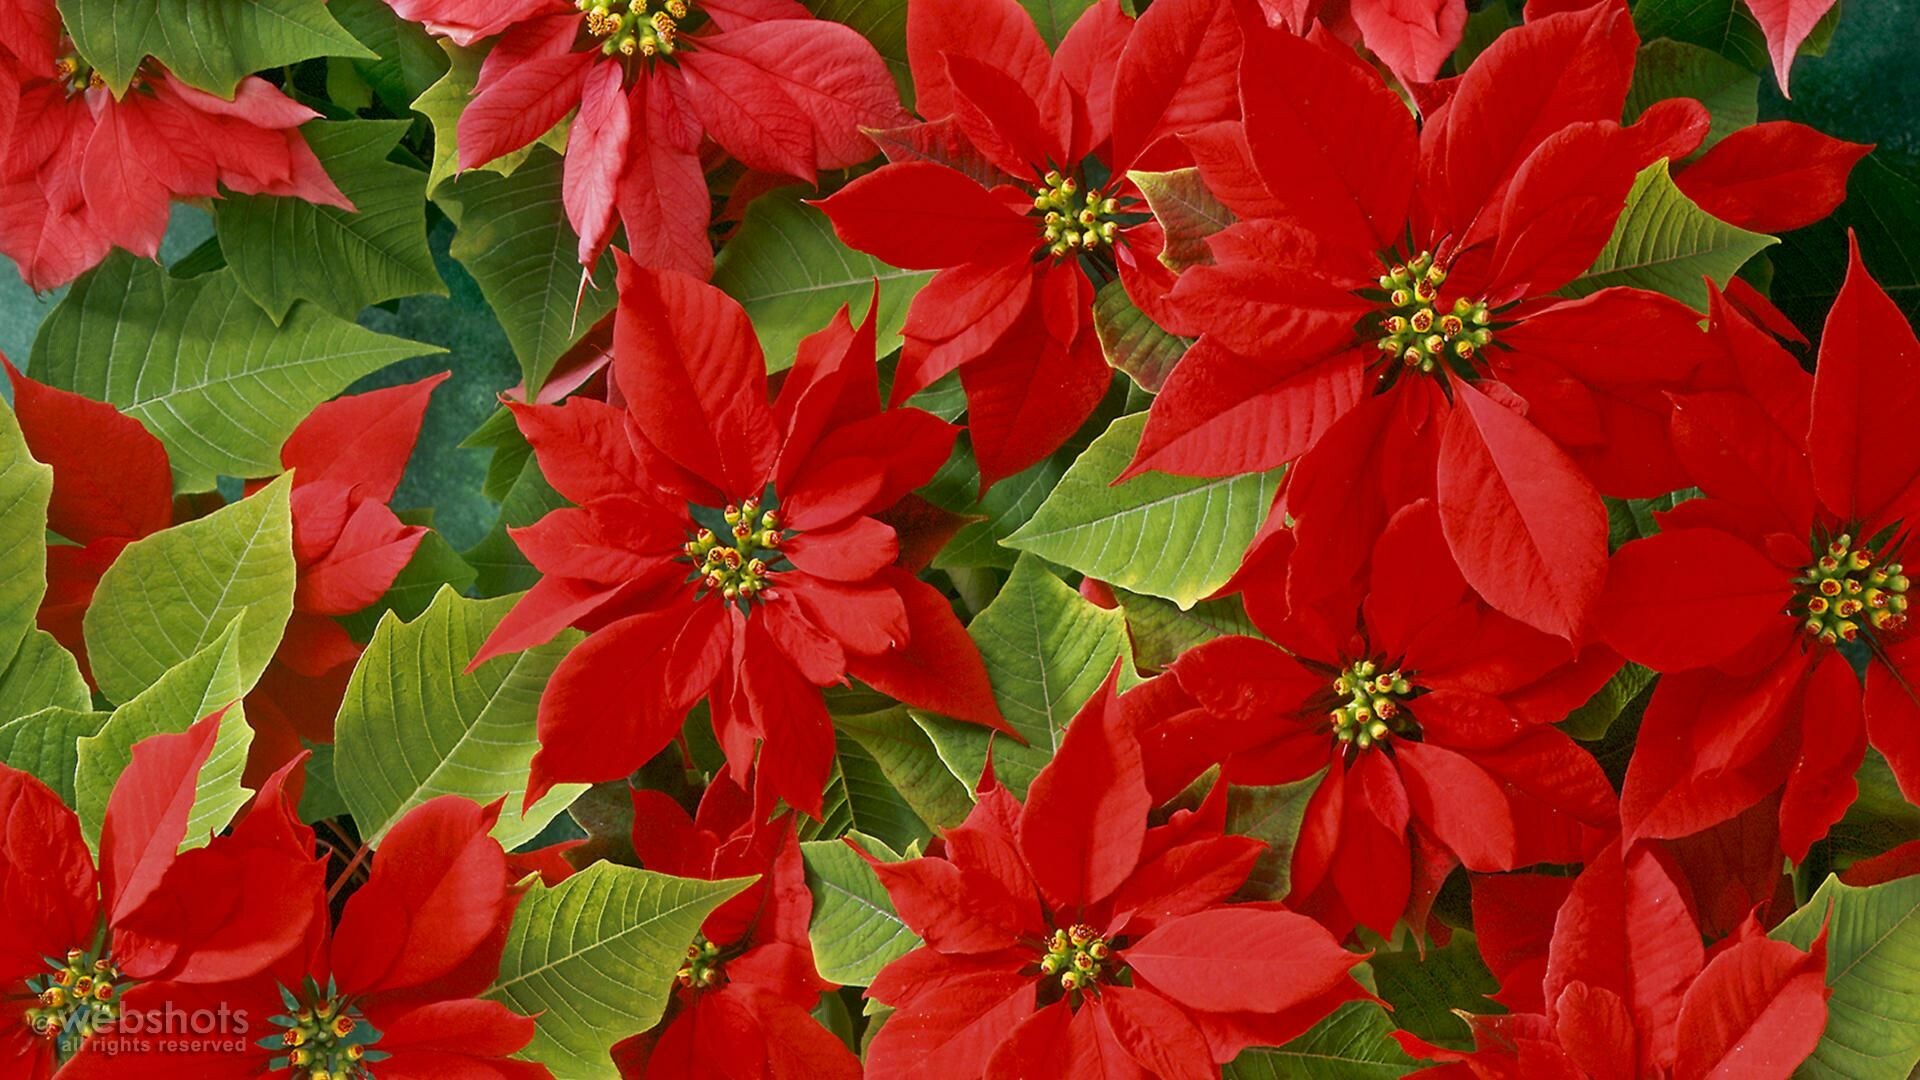 Poinsettia: Attractive house plants with dark green leaves and leafy red 'bracts' that surround the green-yellow flowers in December and January. 1920x1080 Full HD Wallpaper.